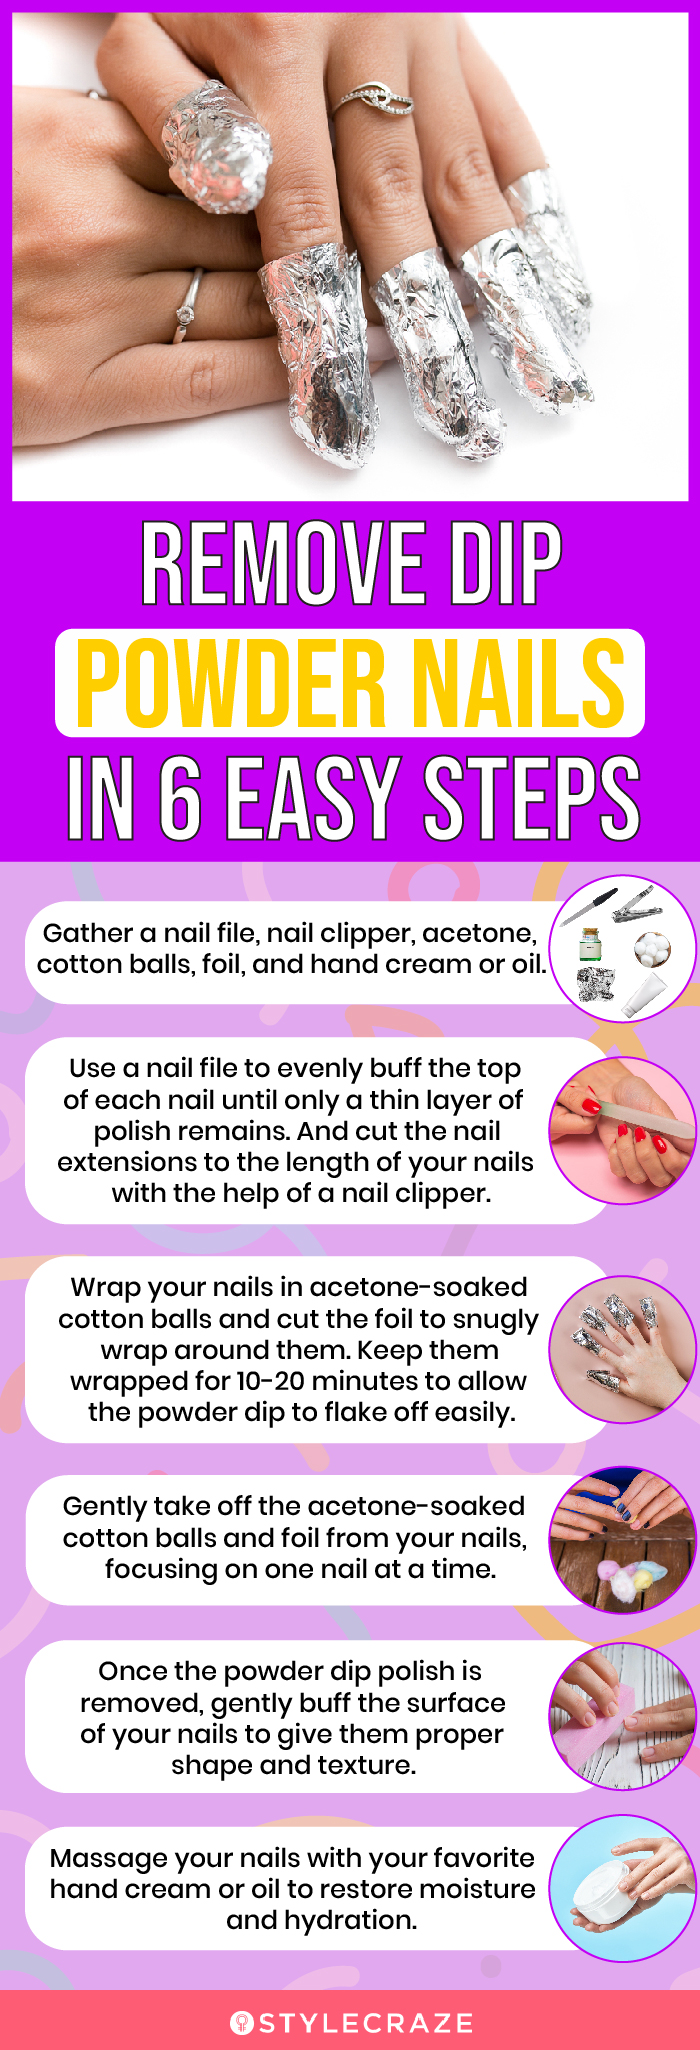  remove dip nails in 6 easy steps(infographic)